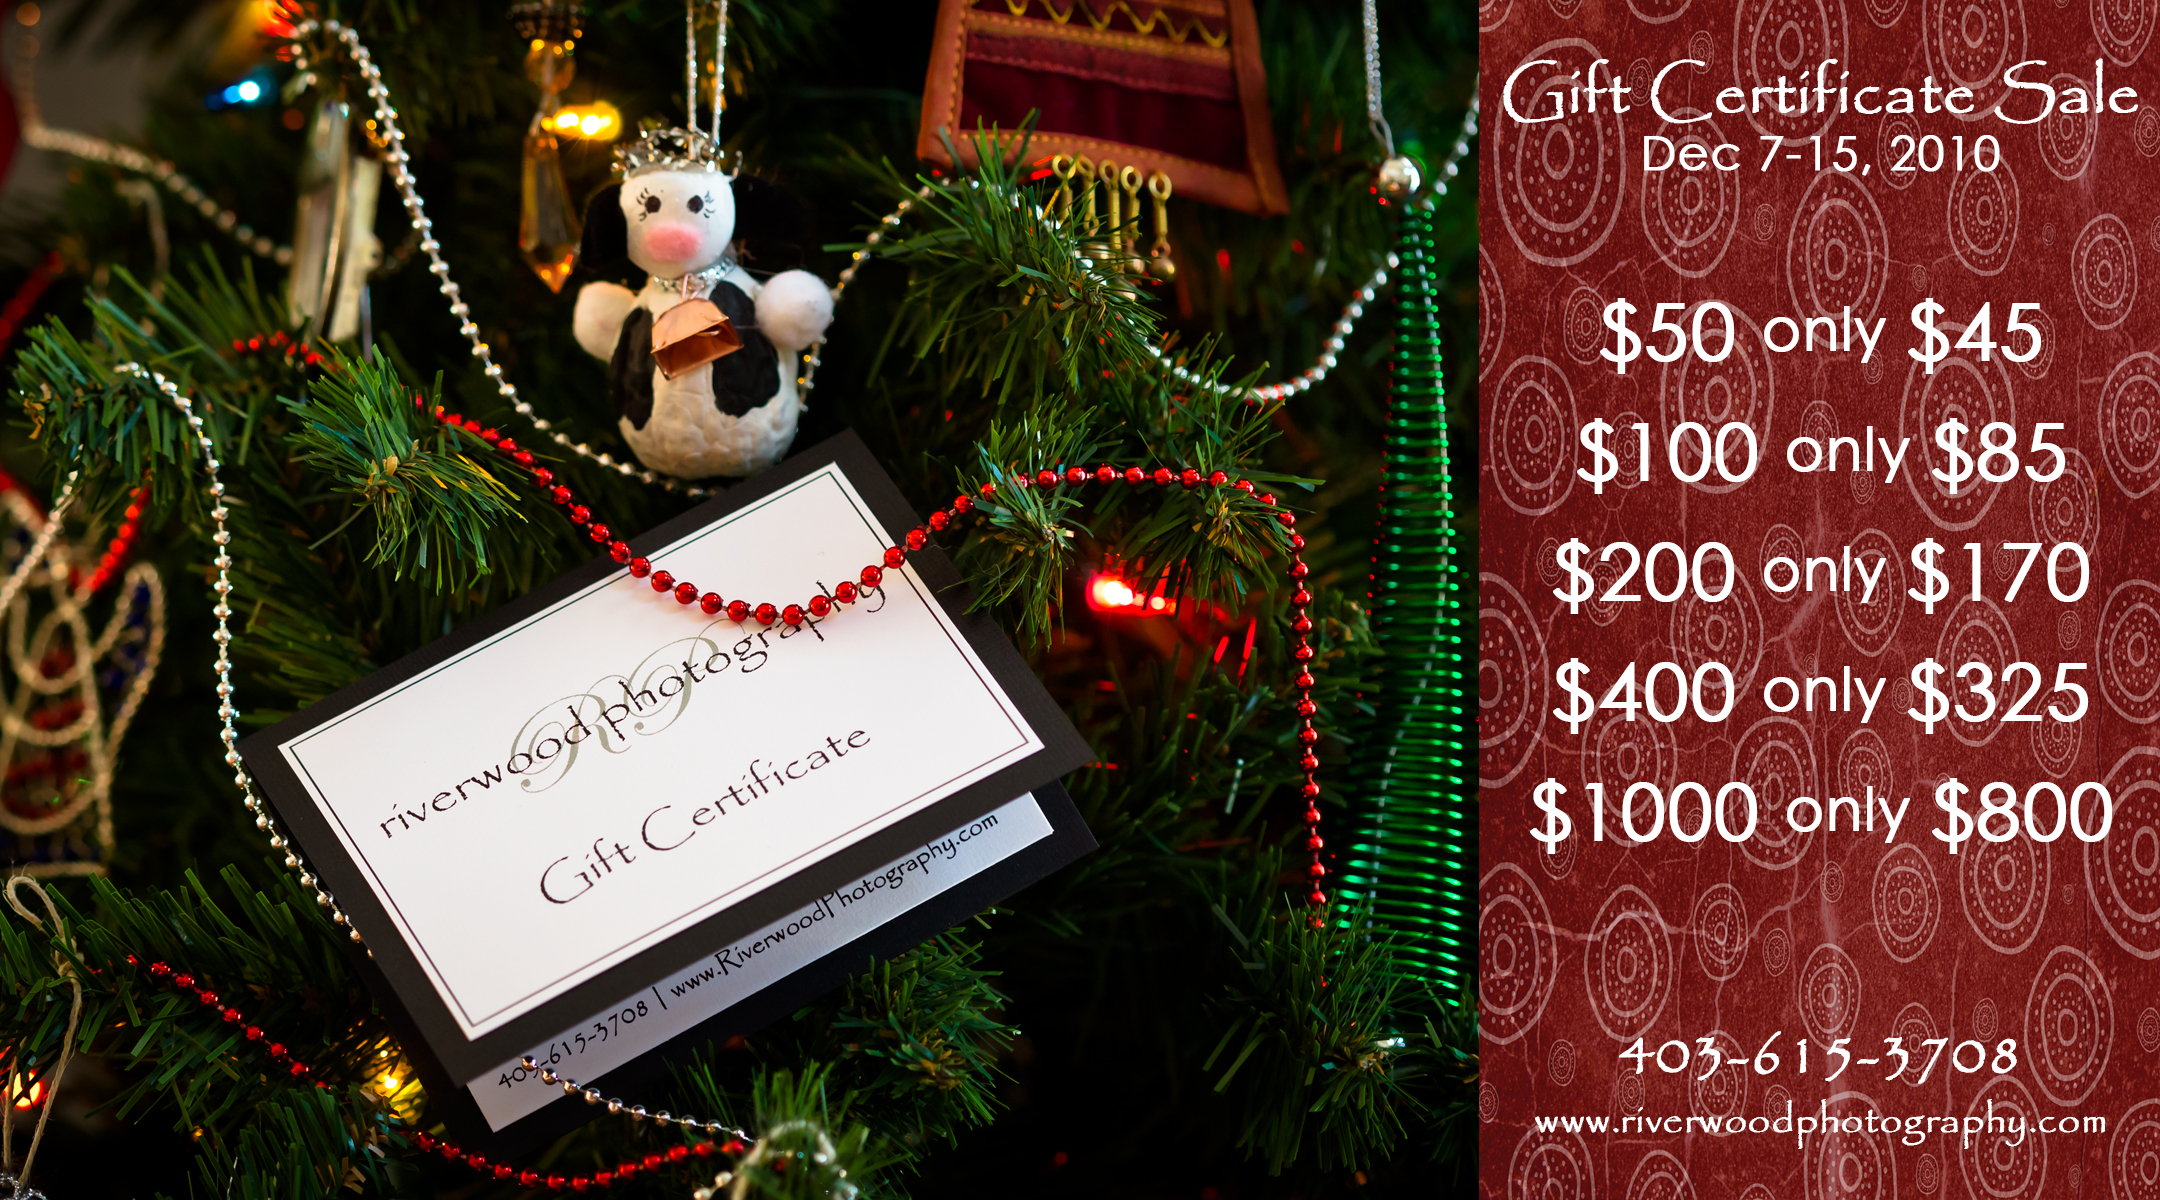 Riverwood Photography December Gift Certificate Sale